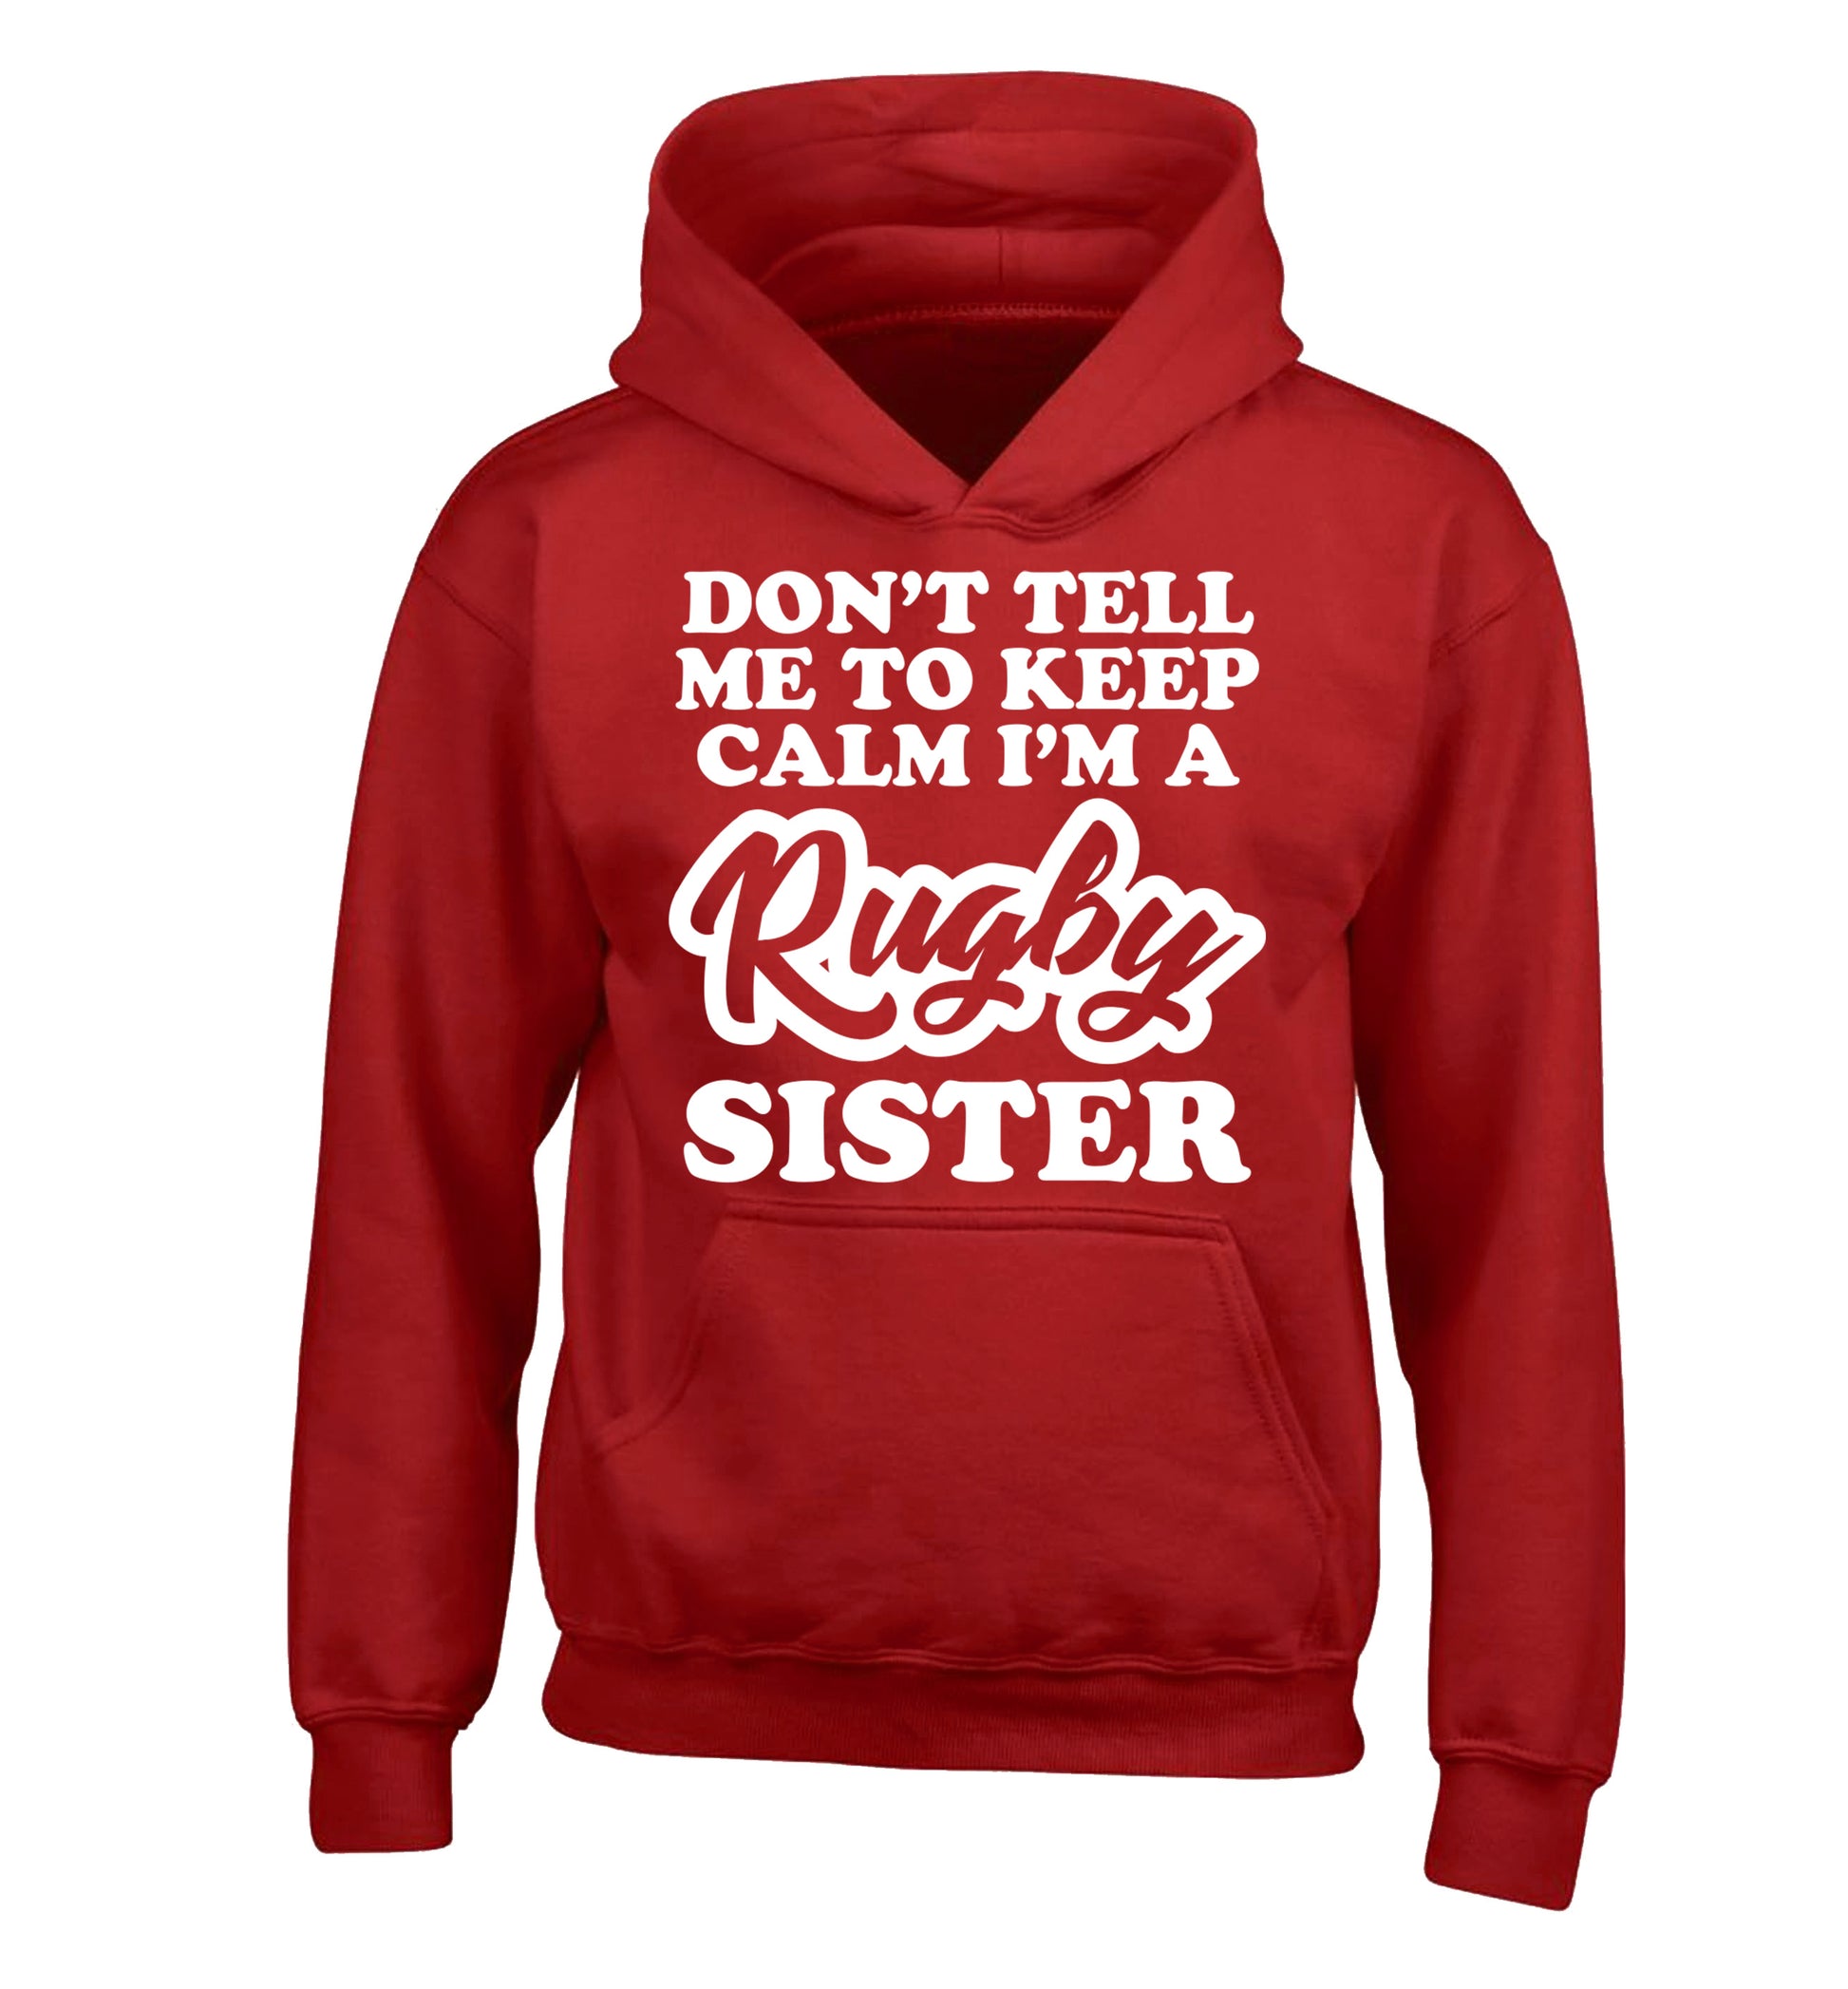 Don't tell me keep calm I'm a rugby sister children's red hoodie 12-13 Years